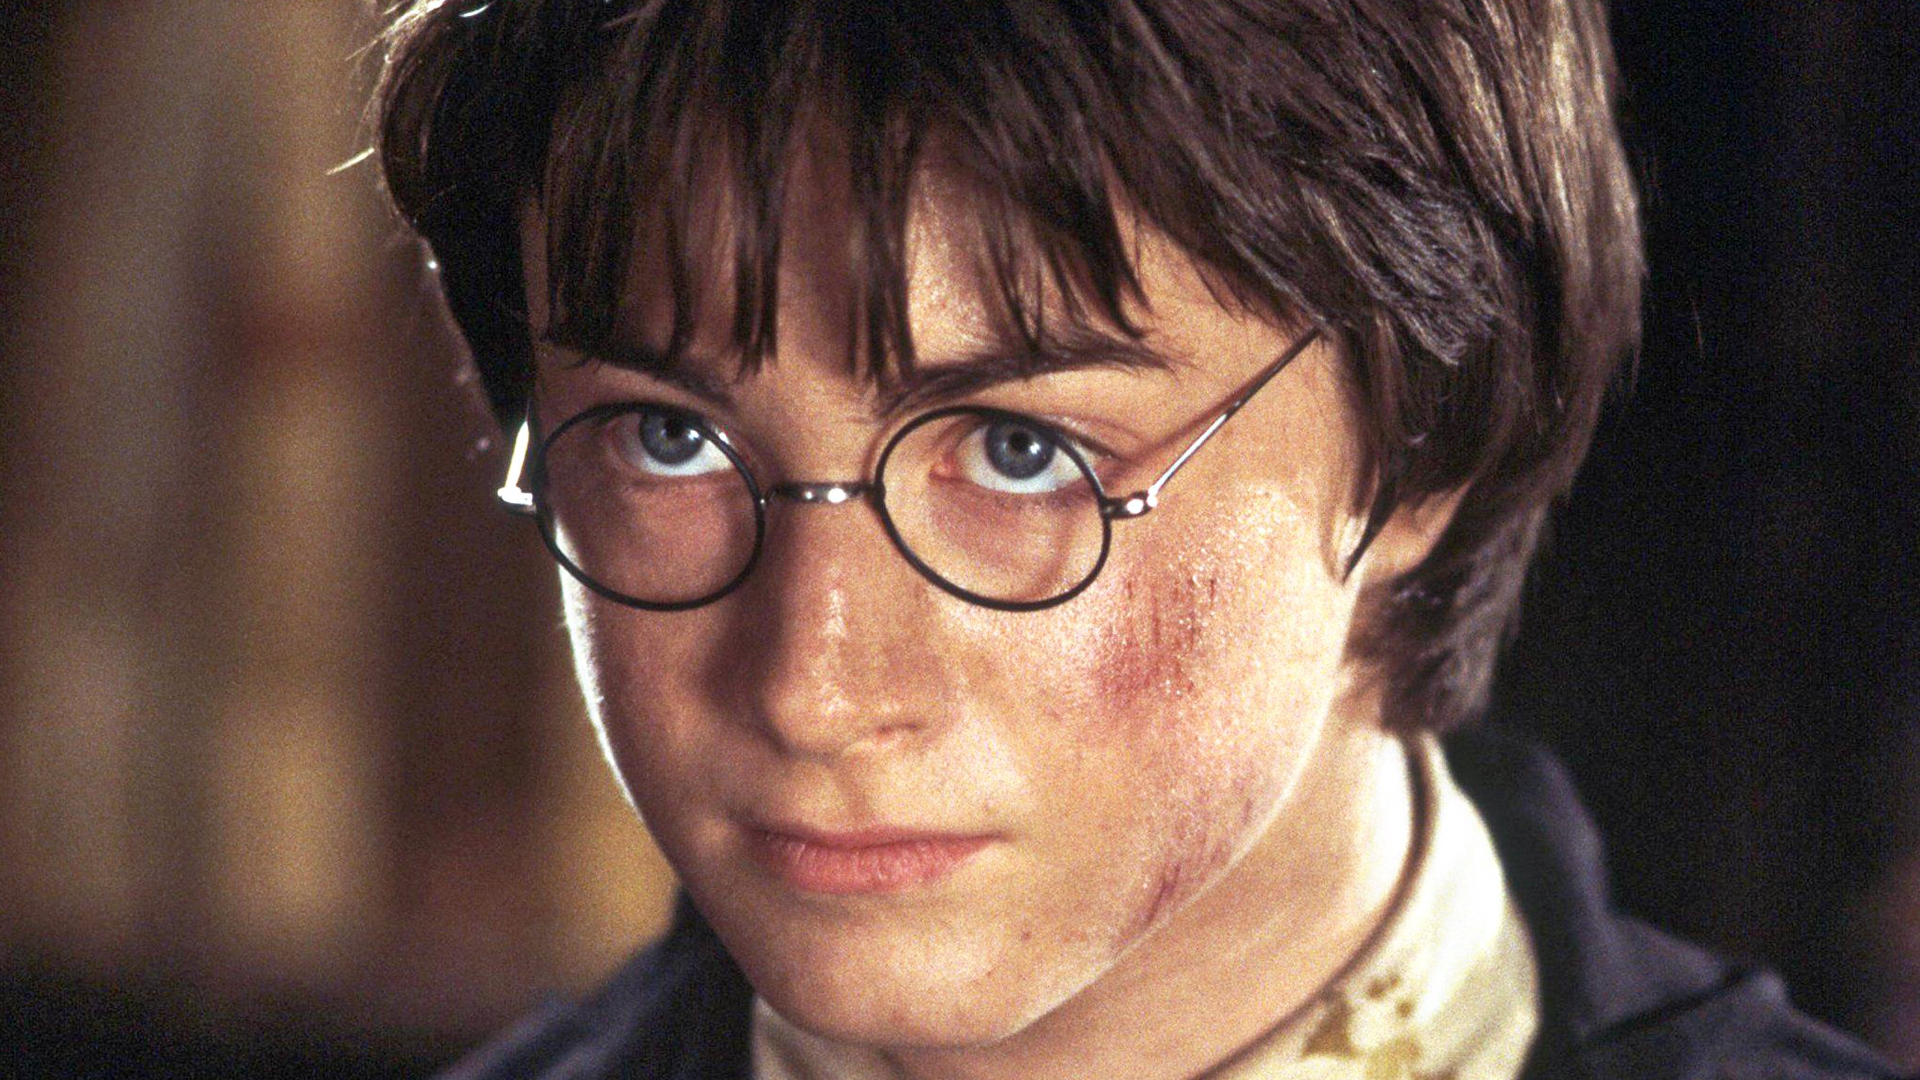 Biggest Harry Potter Thirst Trap Isn't Coming Back in HBO Remake